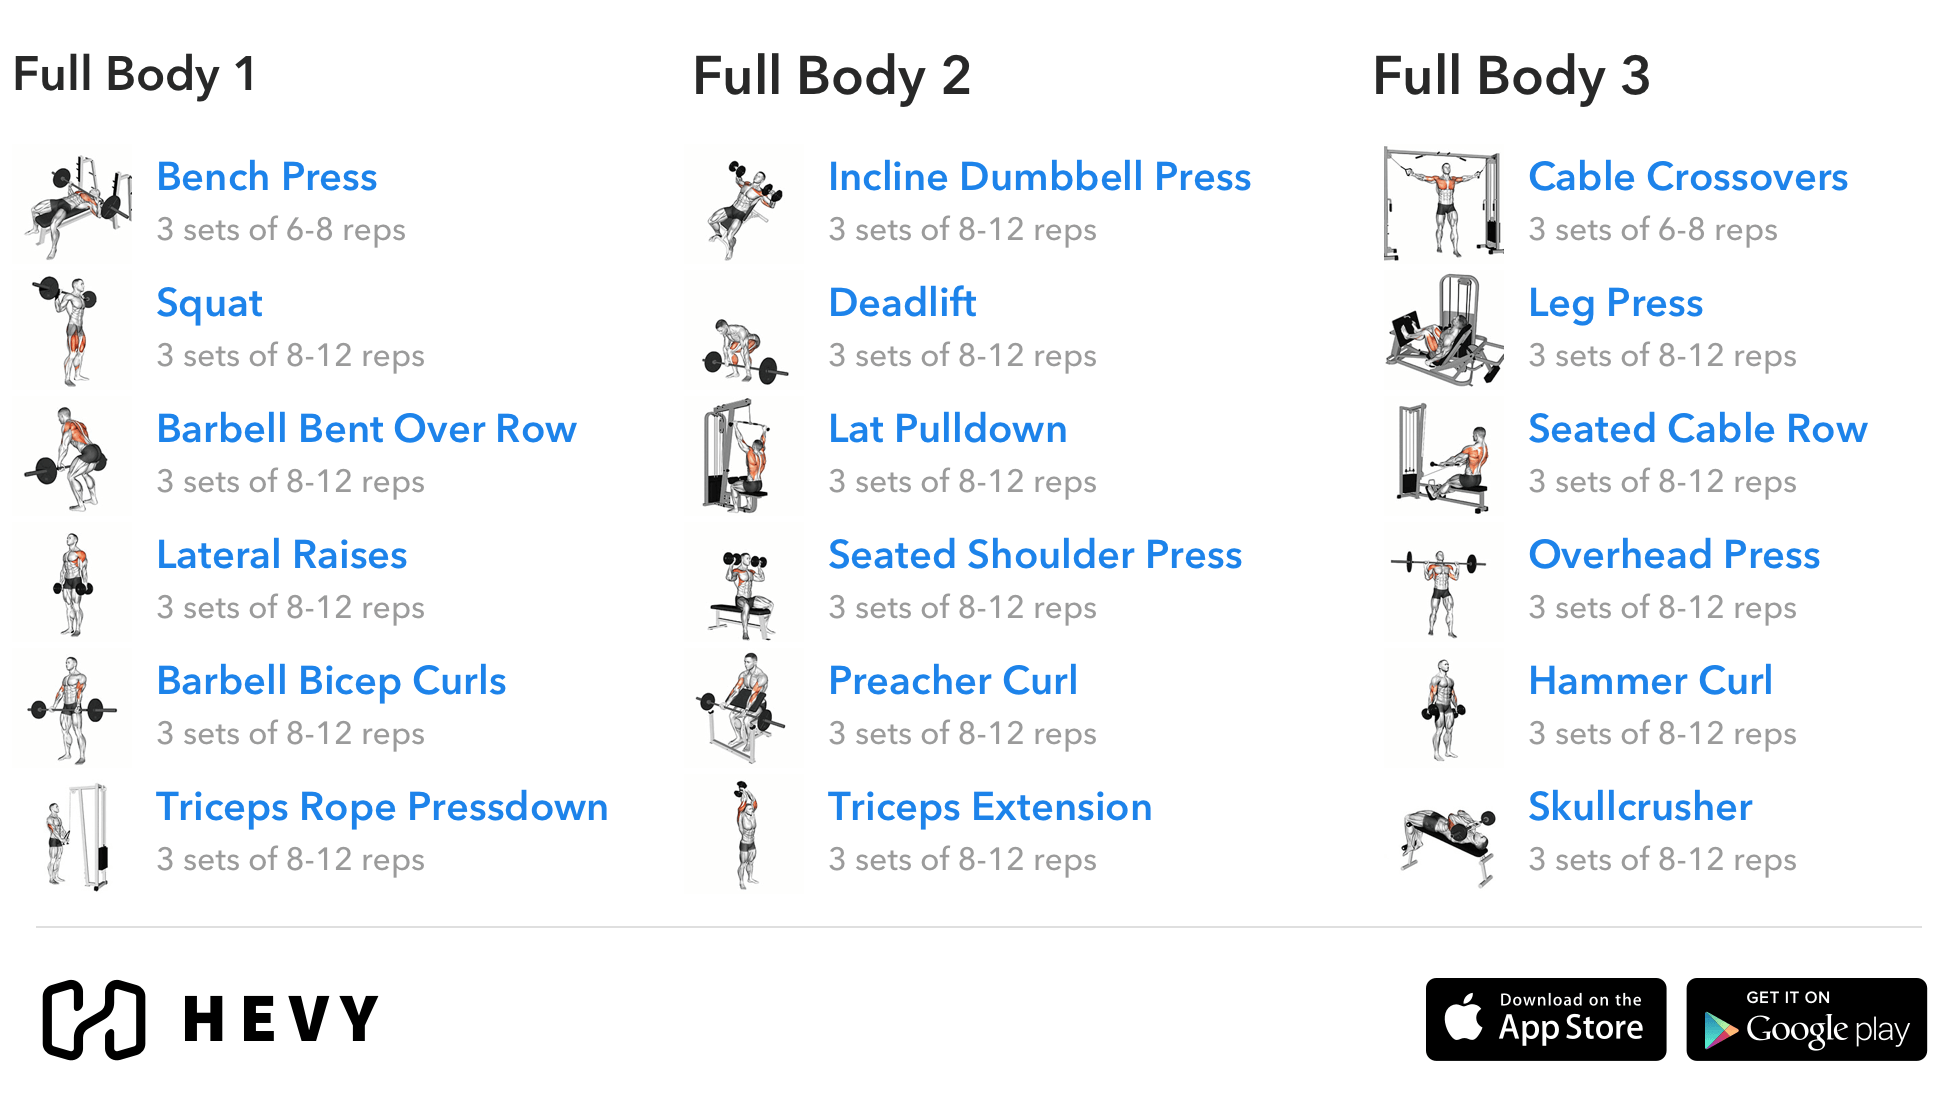 3 Day Split Workout - Complete Guide (2021) - Hevy #1 Workout Tracker